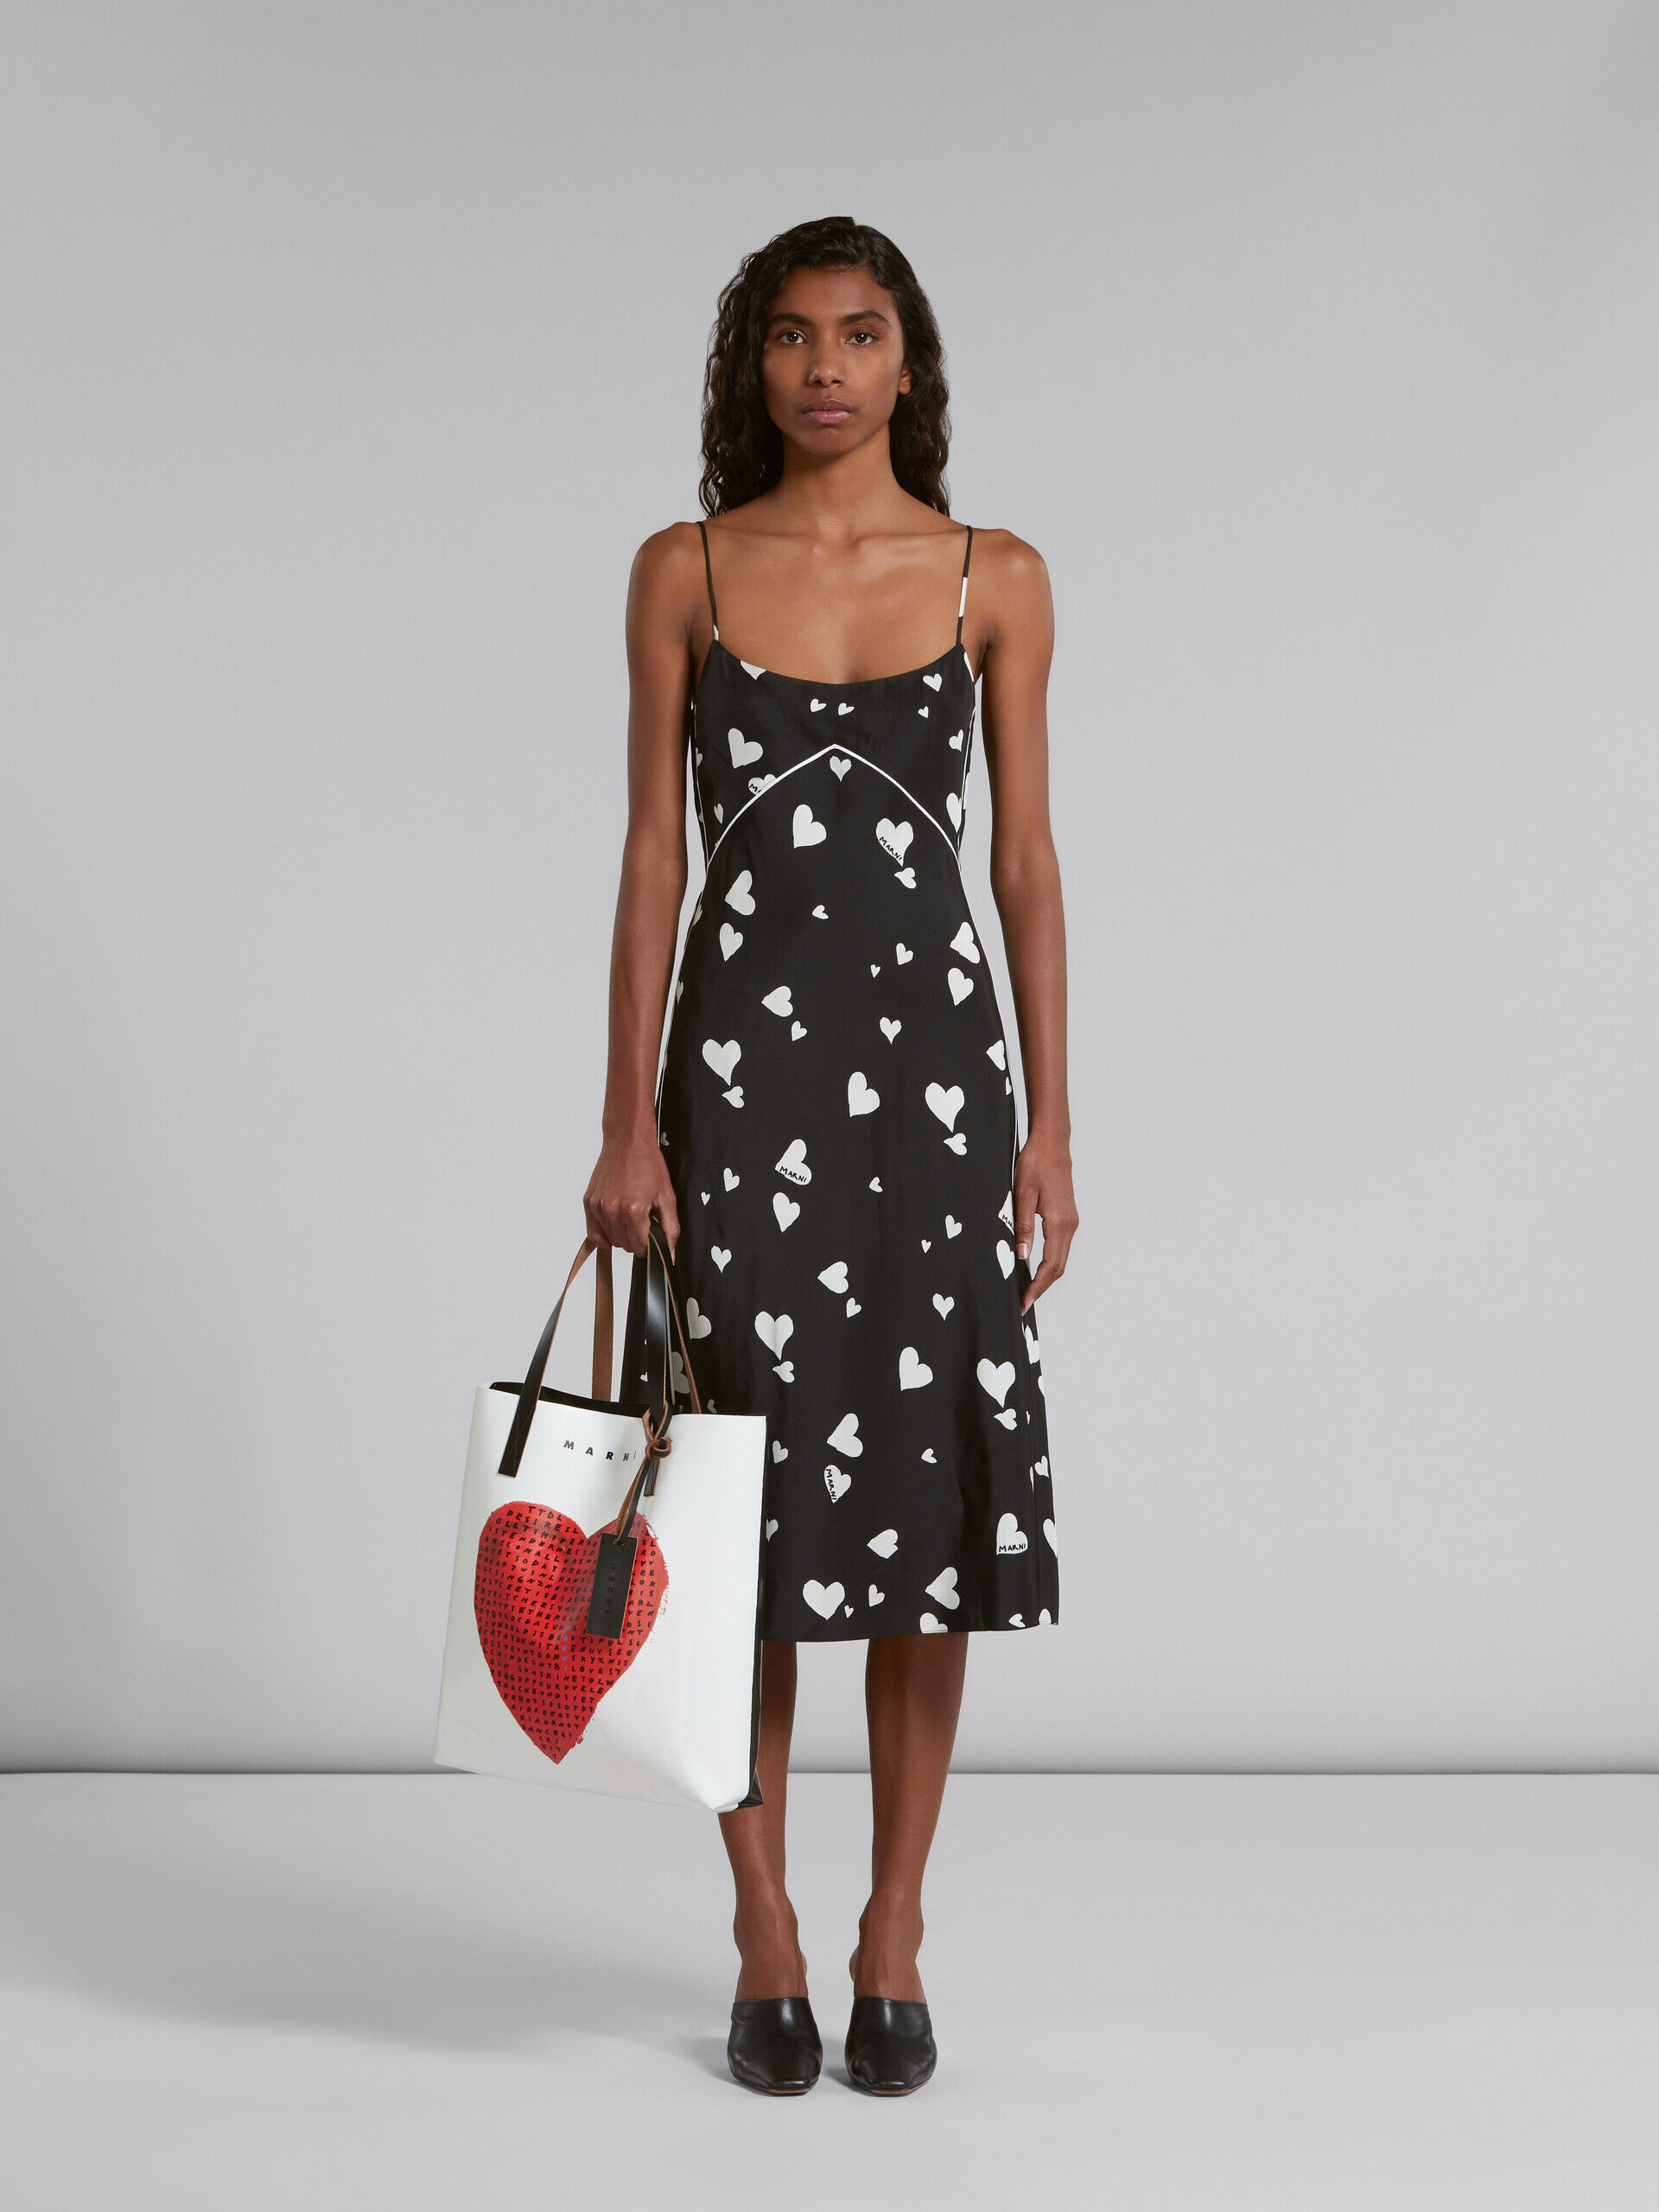 White tote with wordsearch heart print | Marni